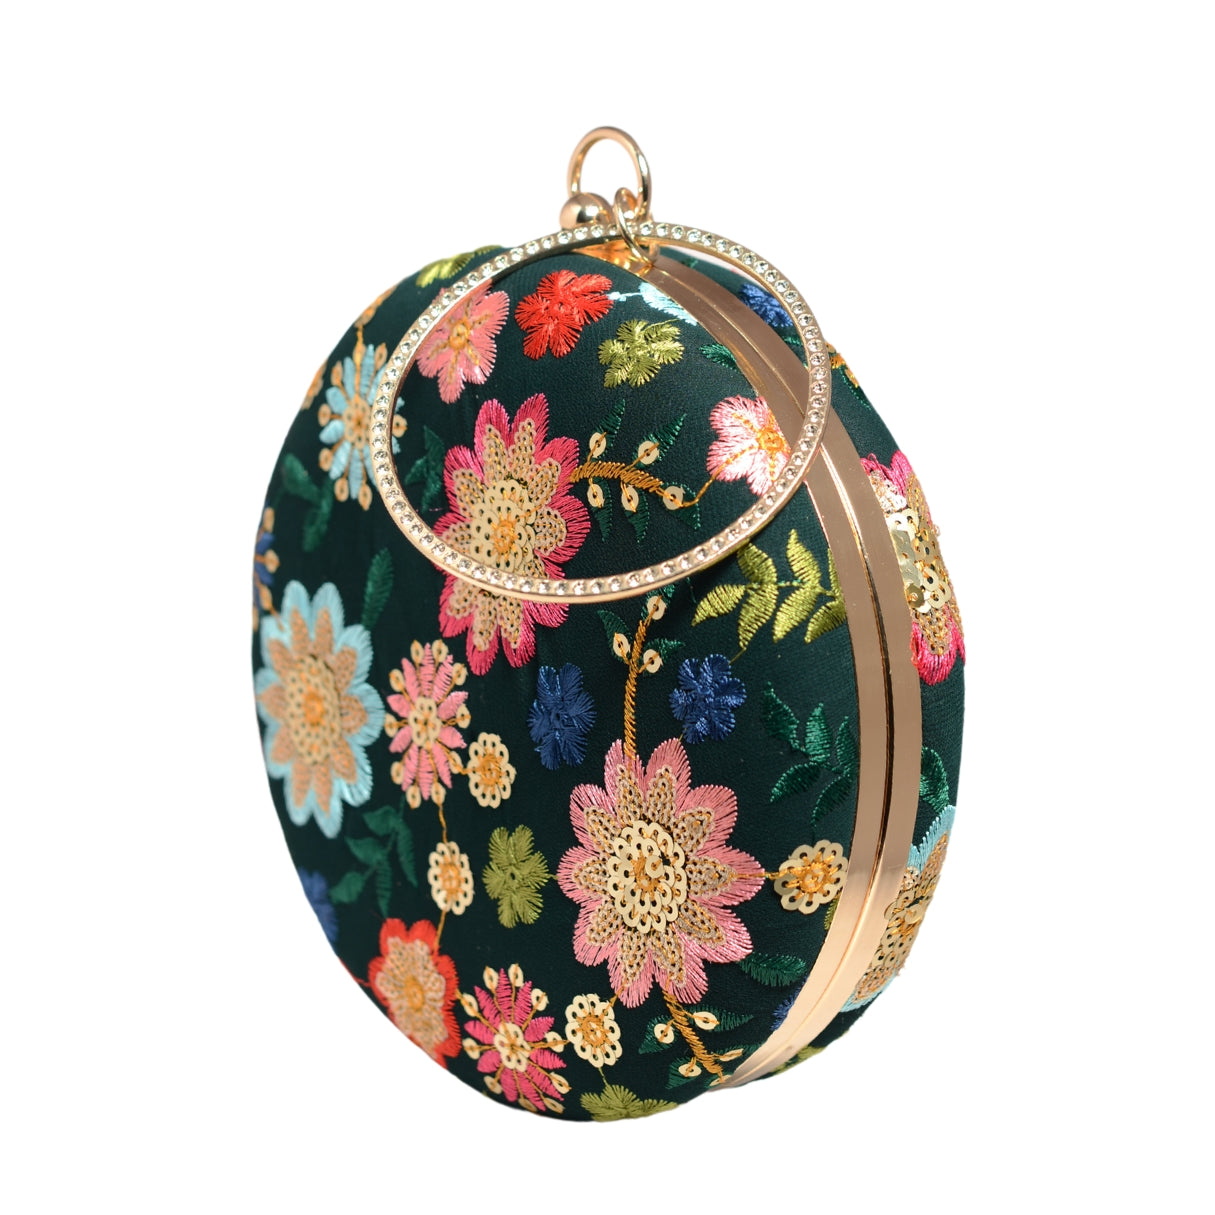 Green Floral Embroidery Round Clutch